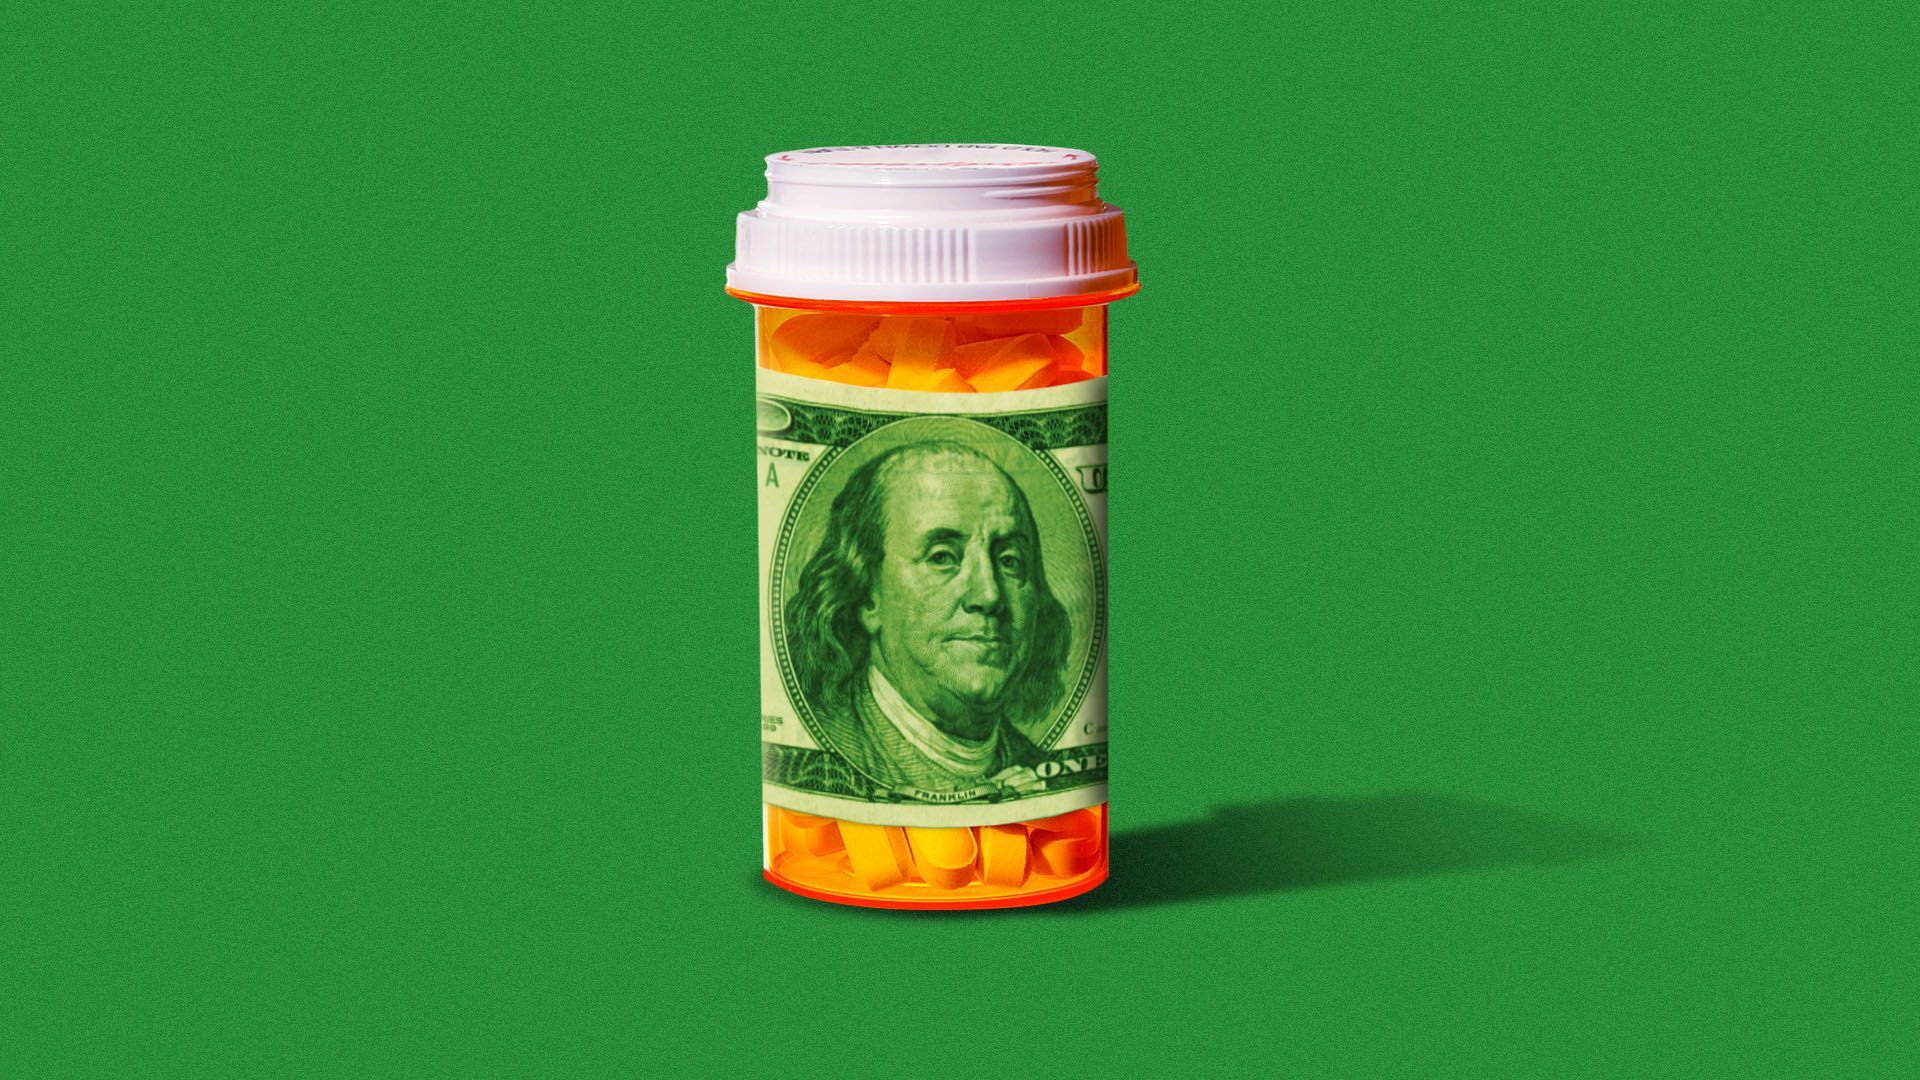 Illustration of a pill bottle with a hundred dollar bill for a label